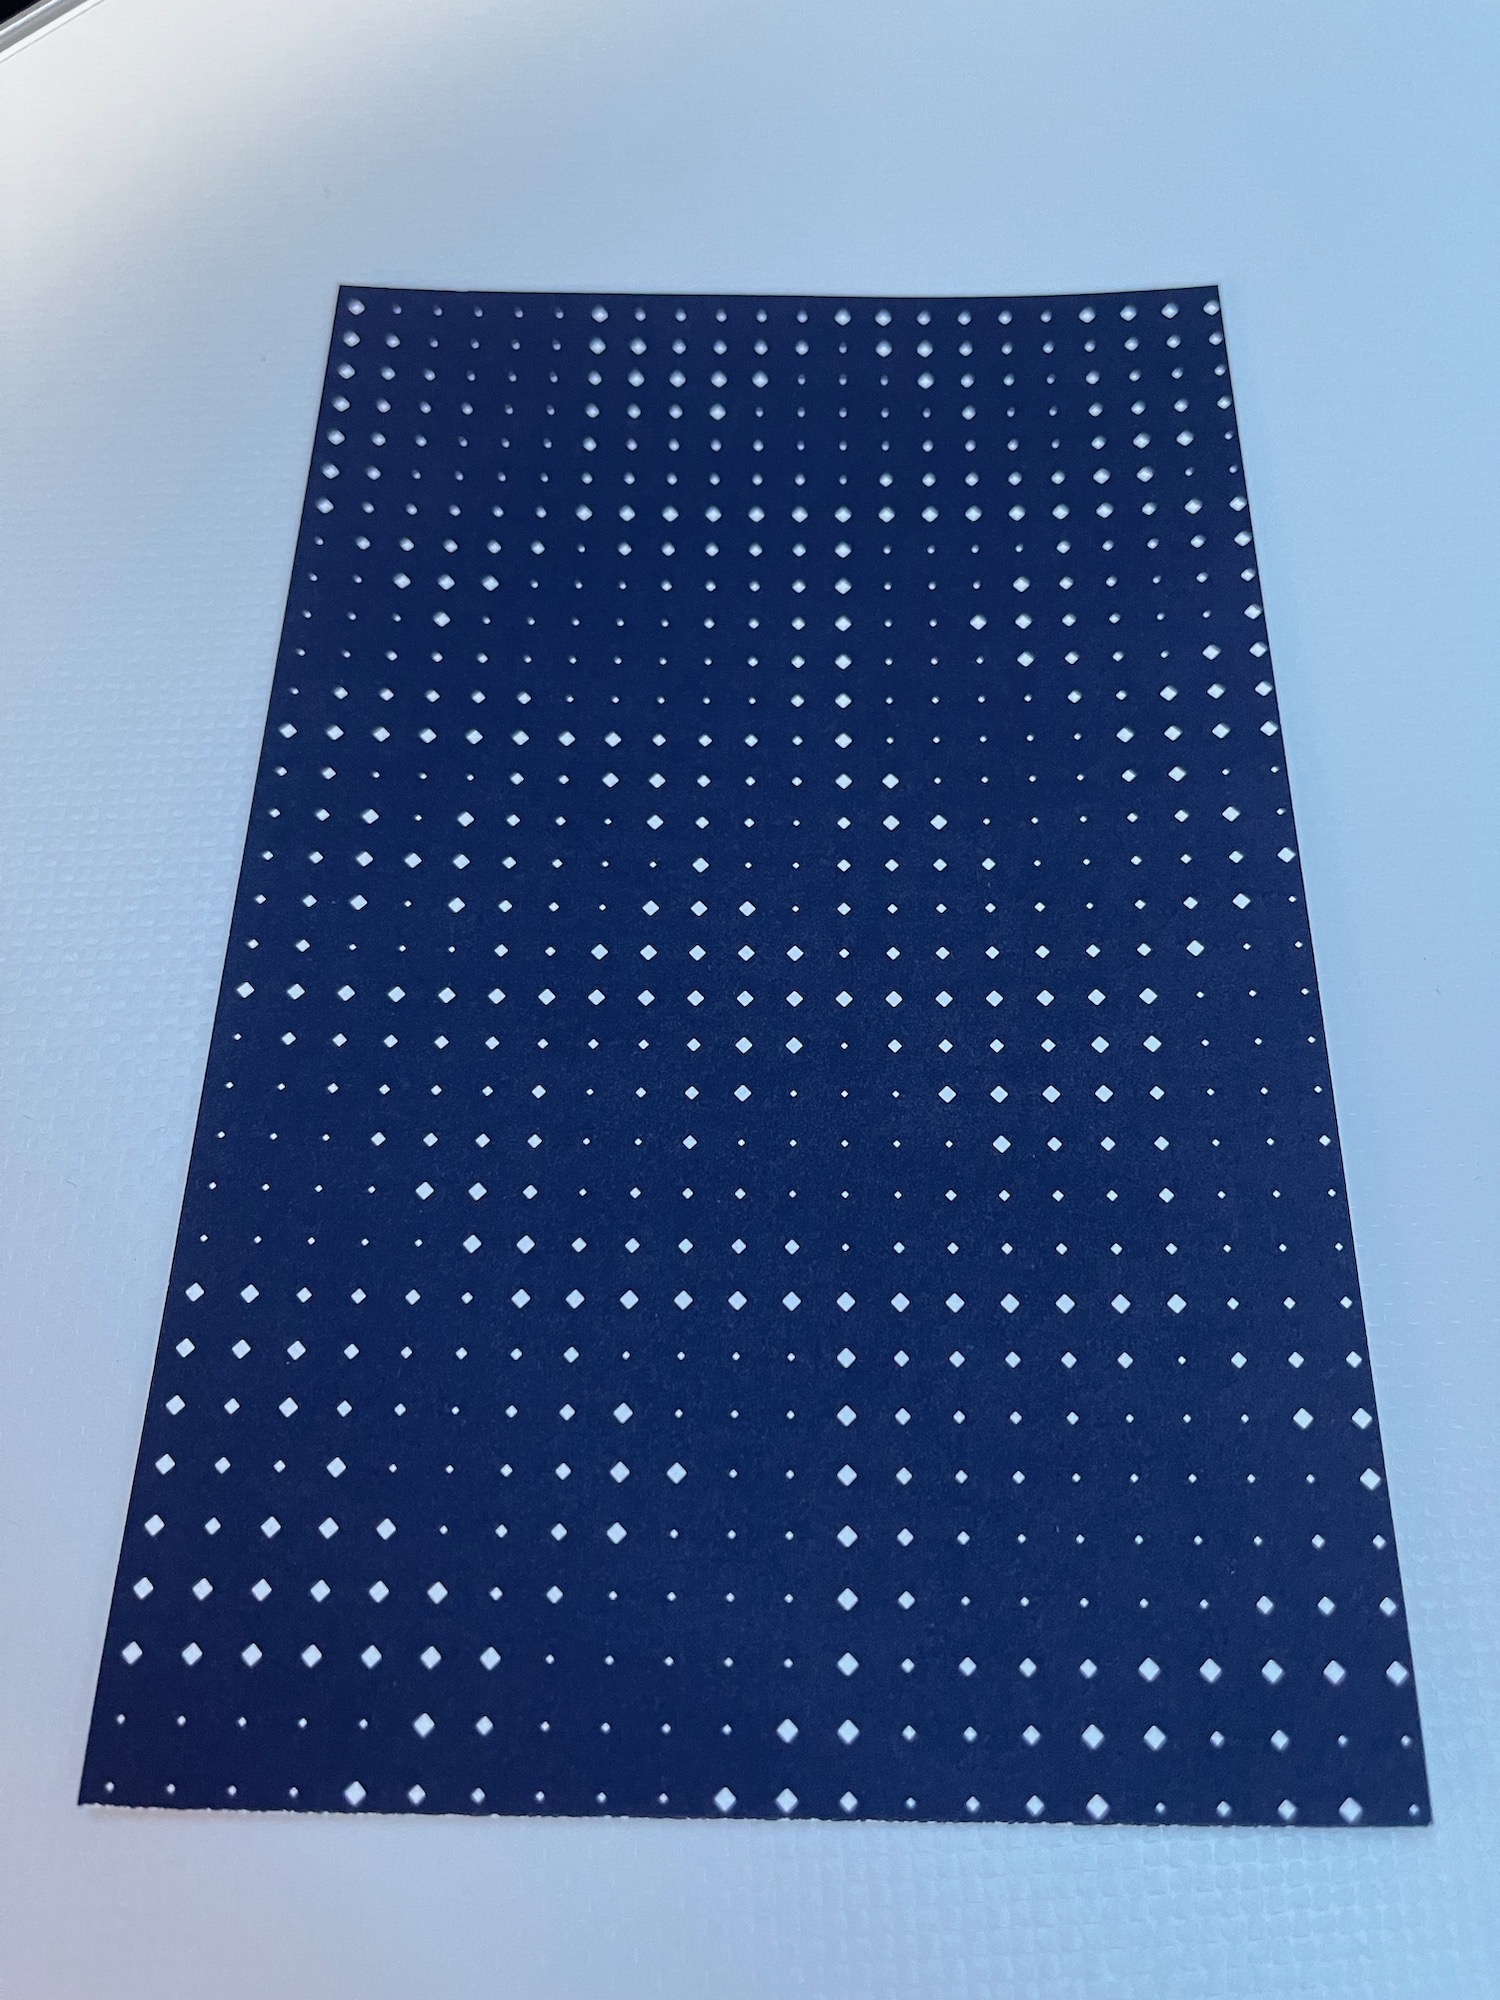 a blue and white rectangular object with white dots